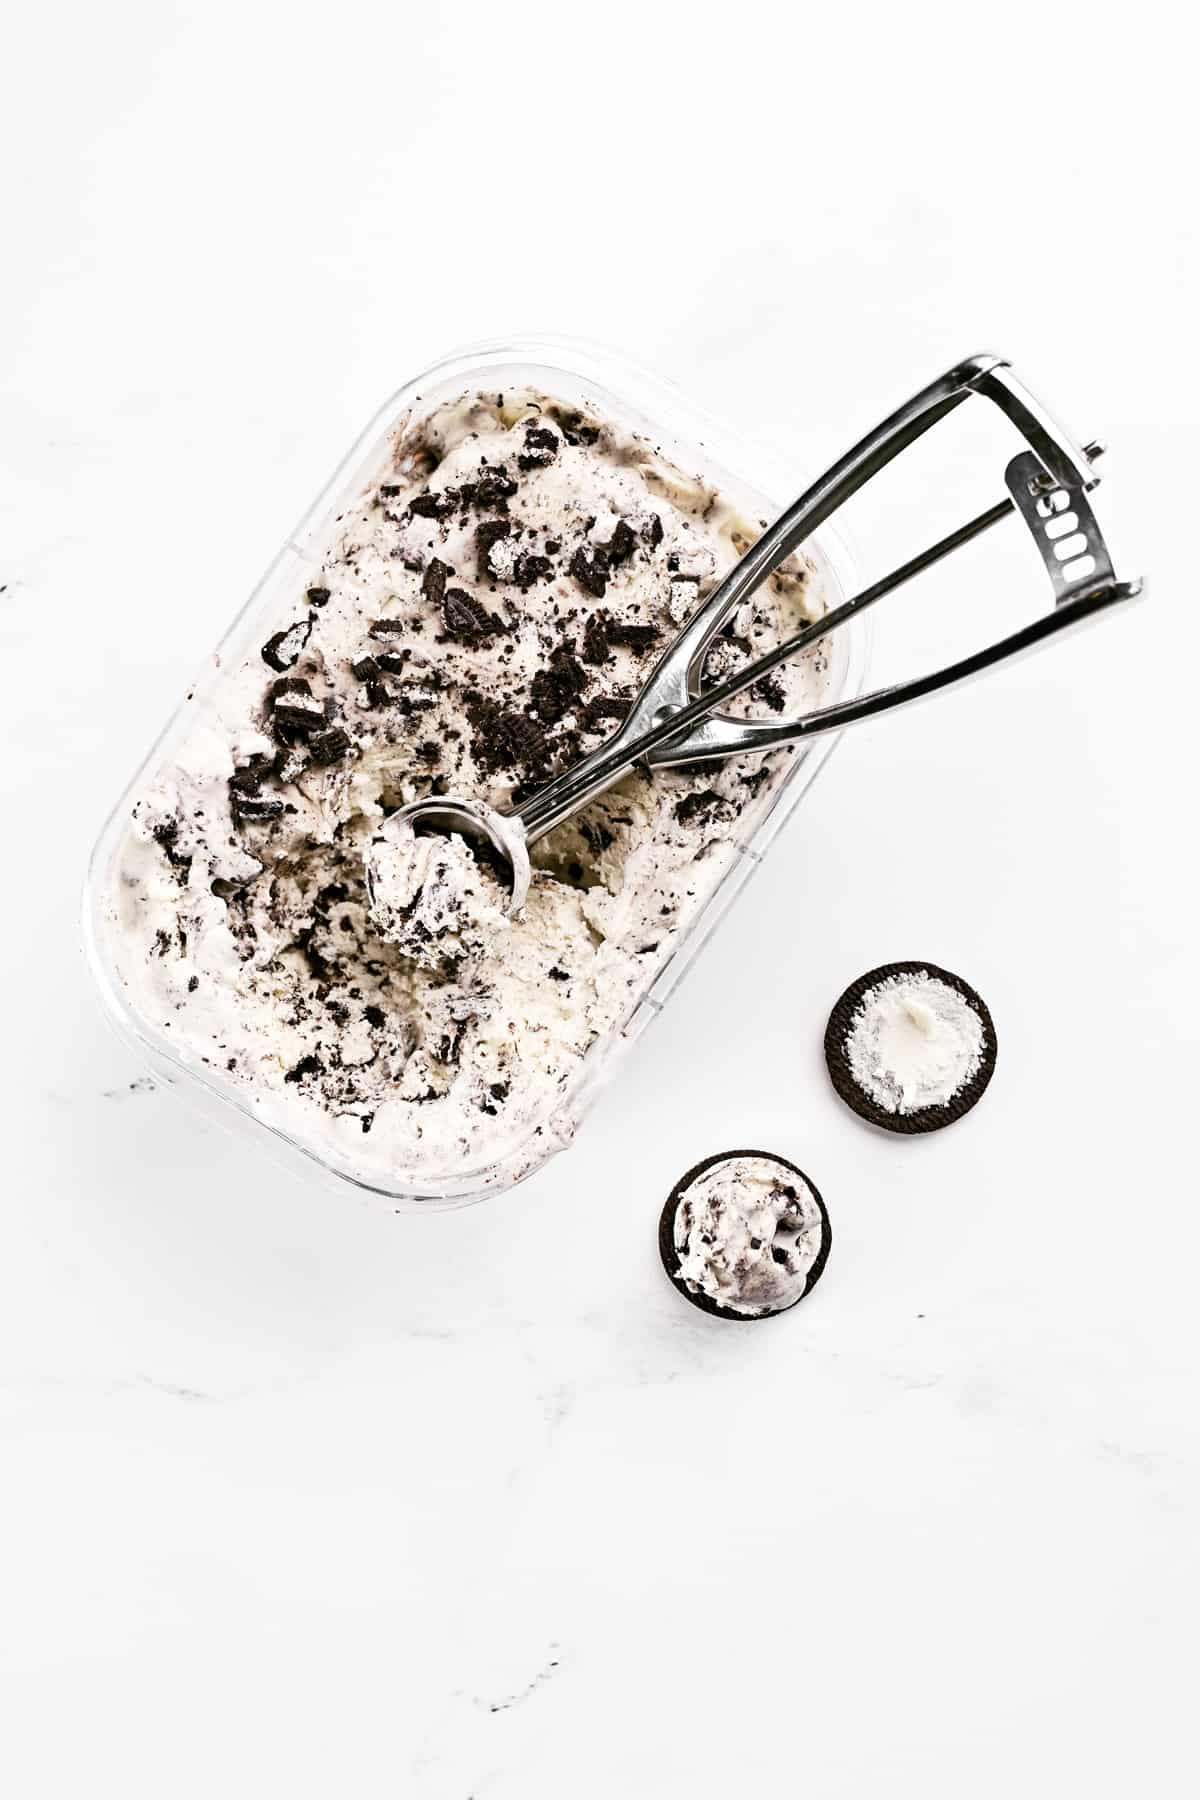 An ice cream scoop in an ice cream container next to an Oreo cookie with a scoop of ice cream on it.